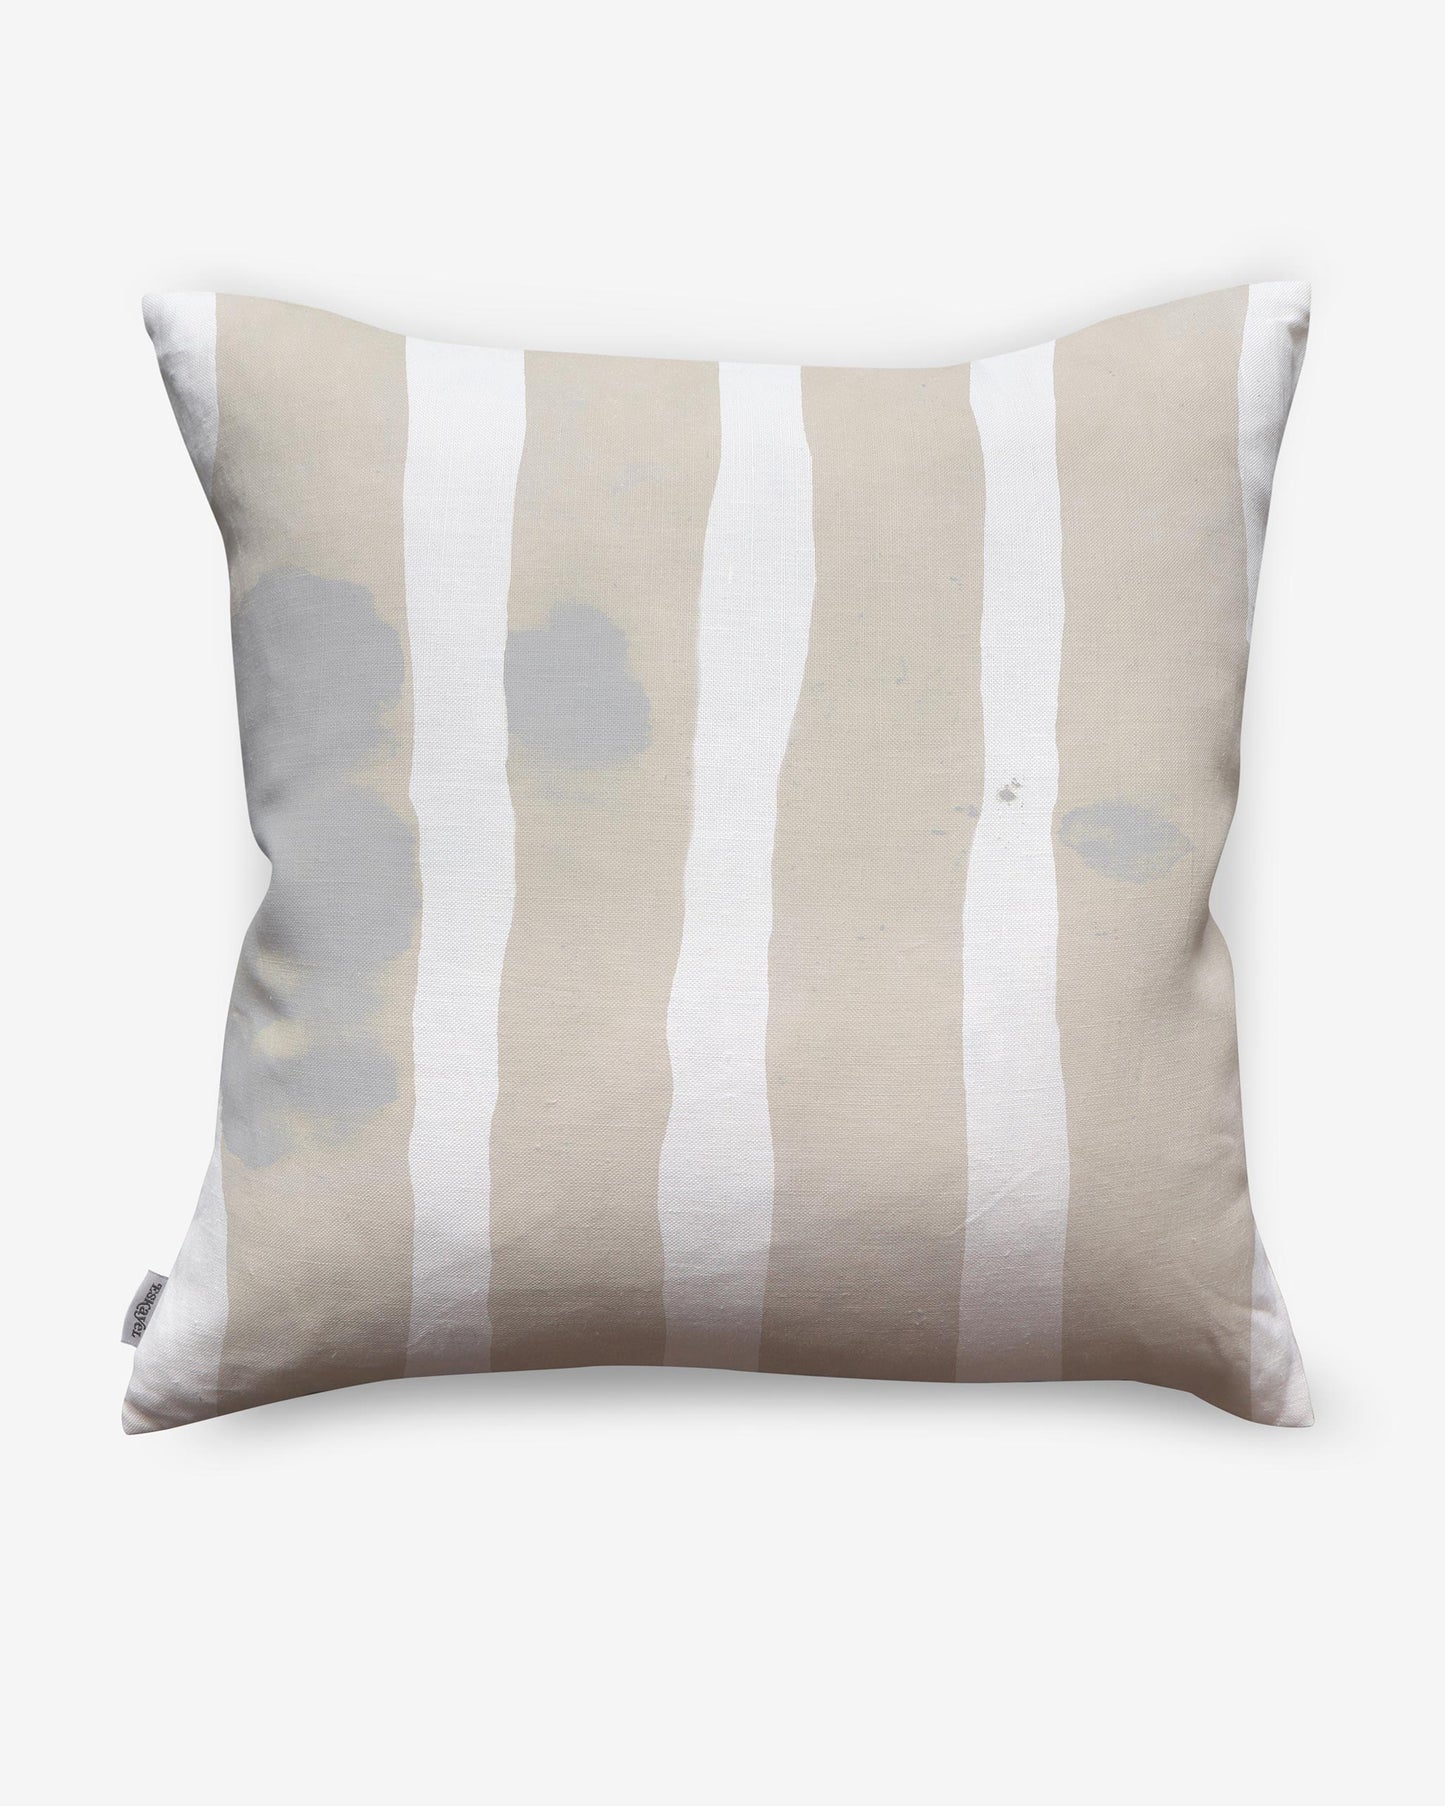 A Bold Stripe Pillow 20' x 20' Sand with beige and white stripes